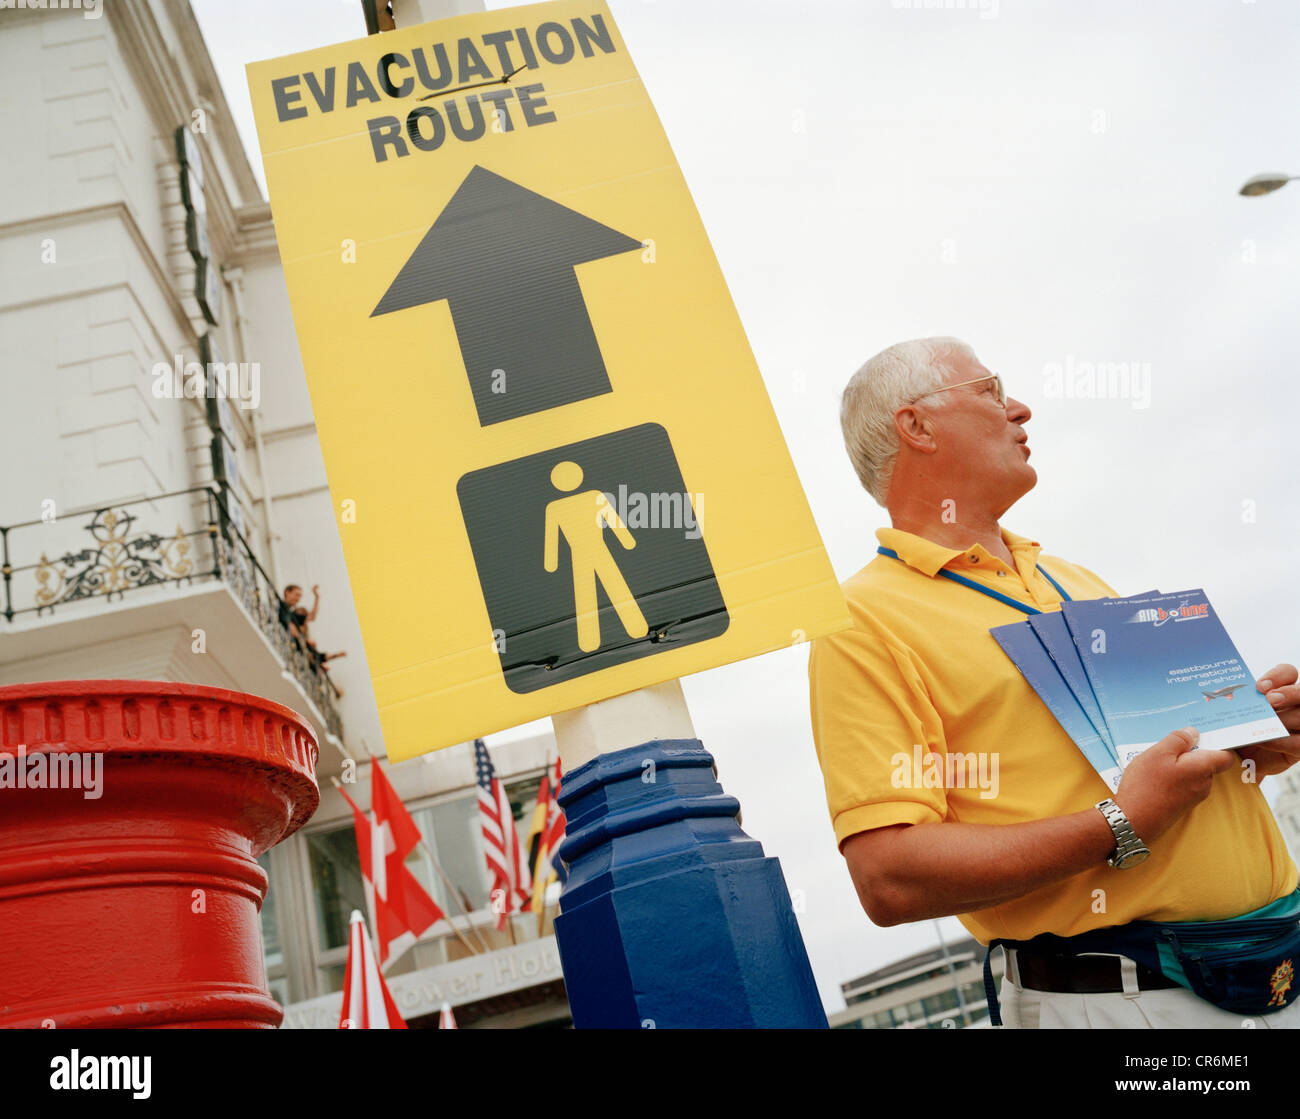 Man sells airshow programmes under council sign for evacuation routes poster during local airshow weekend. Stock Photo